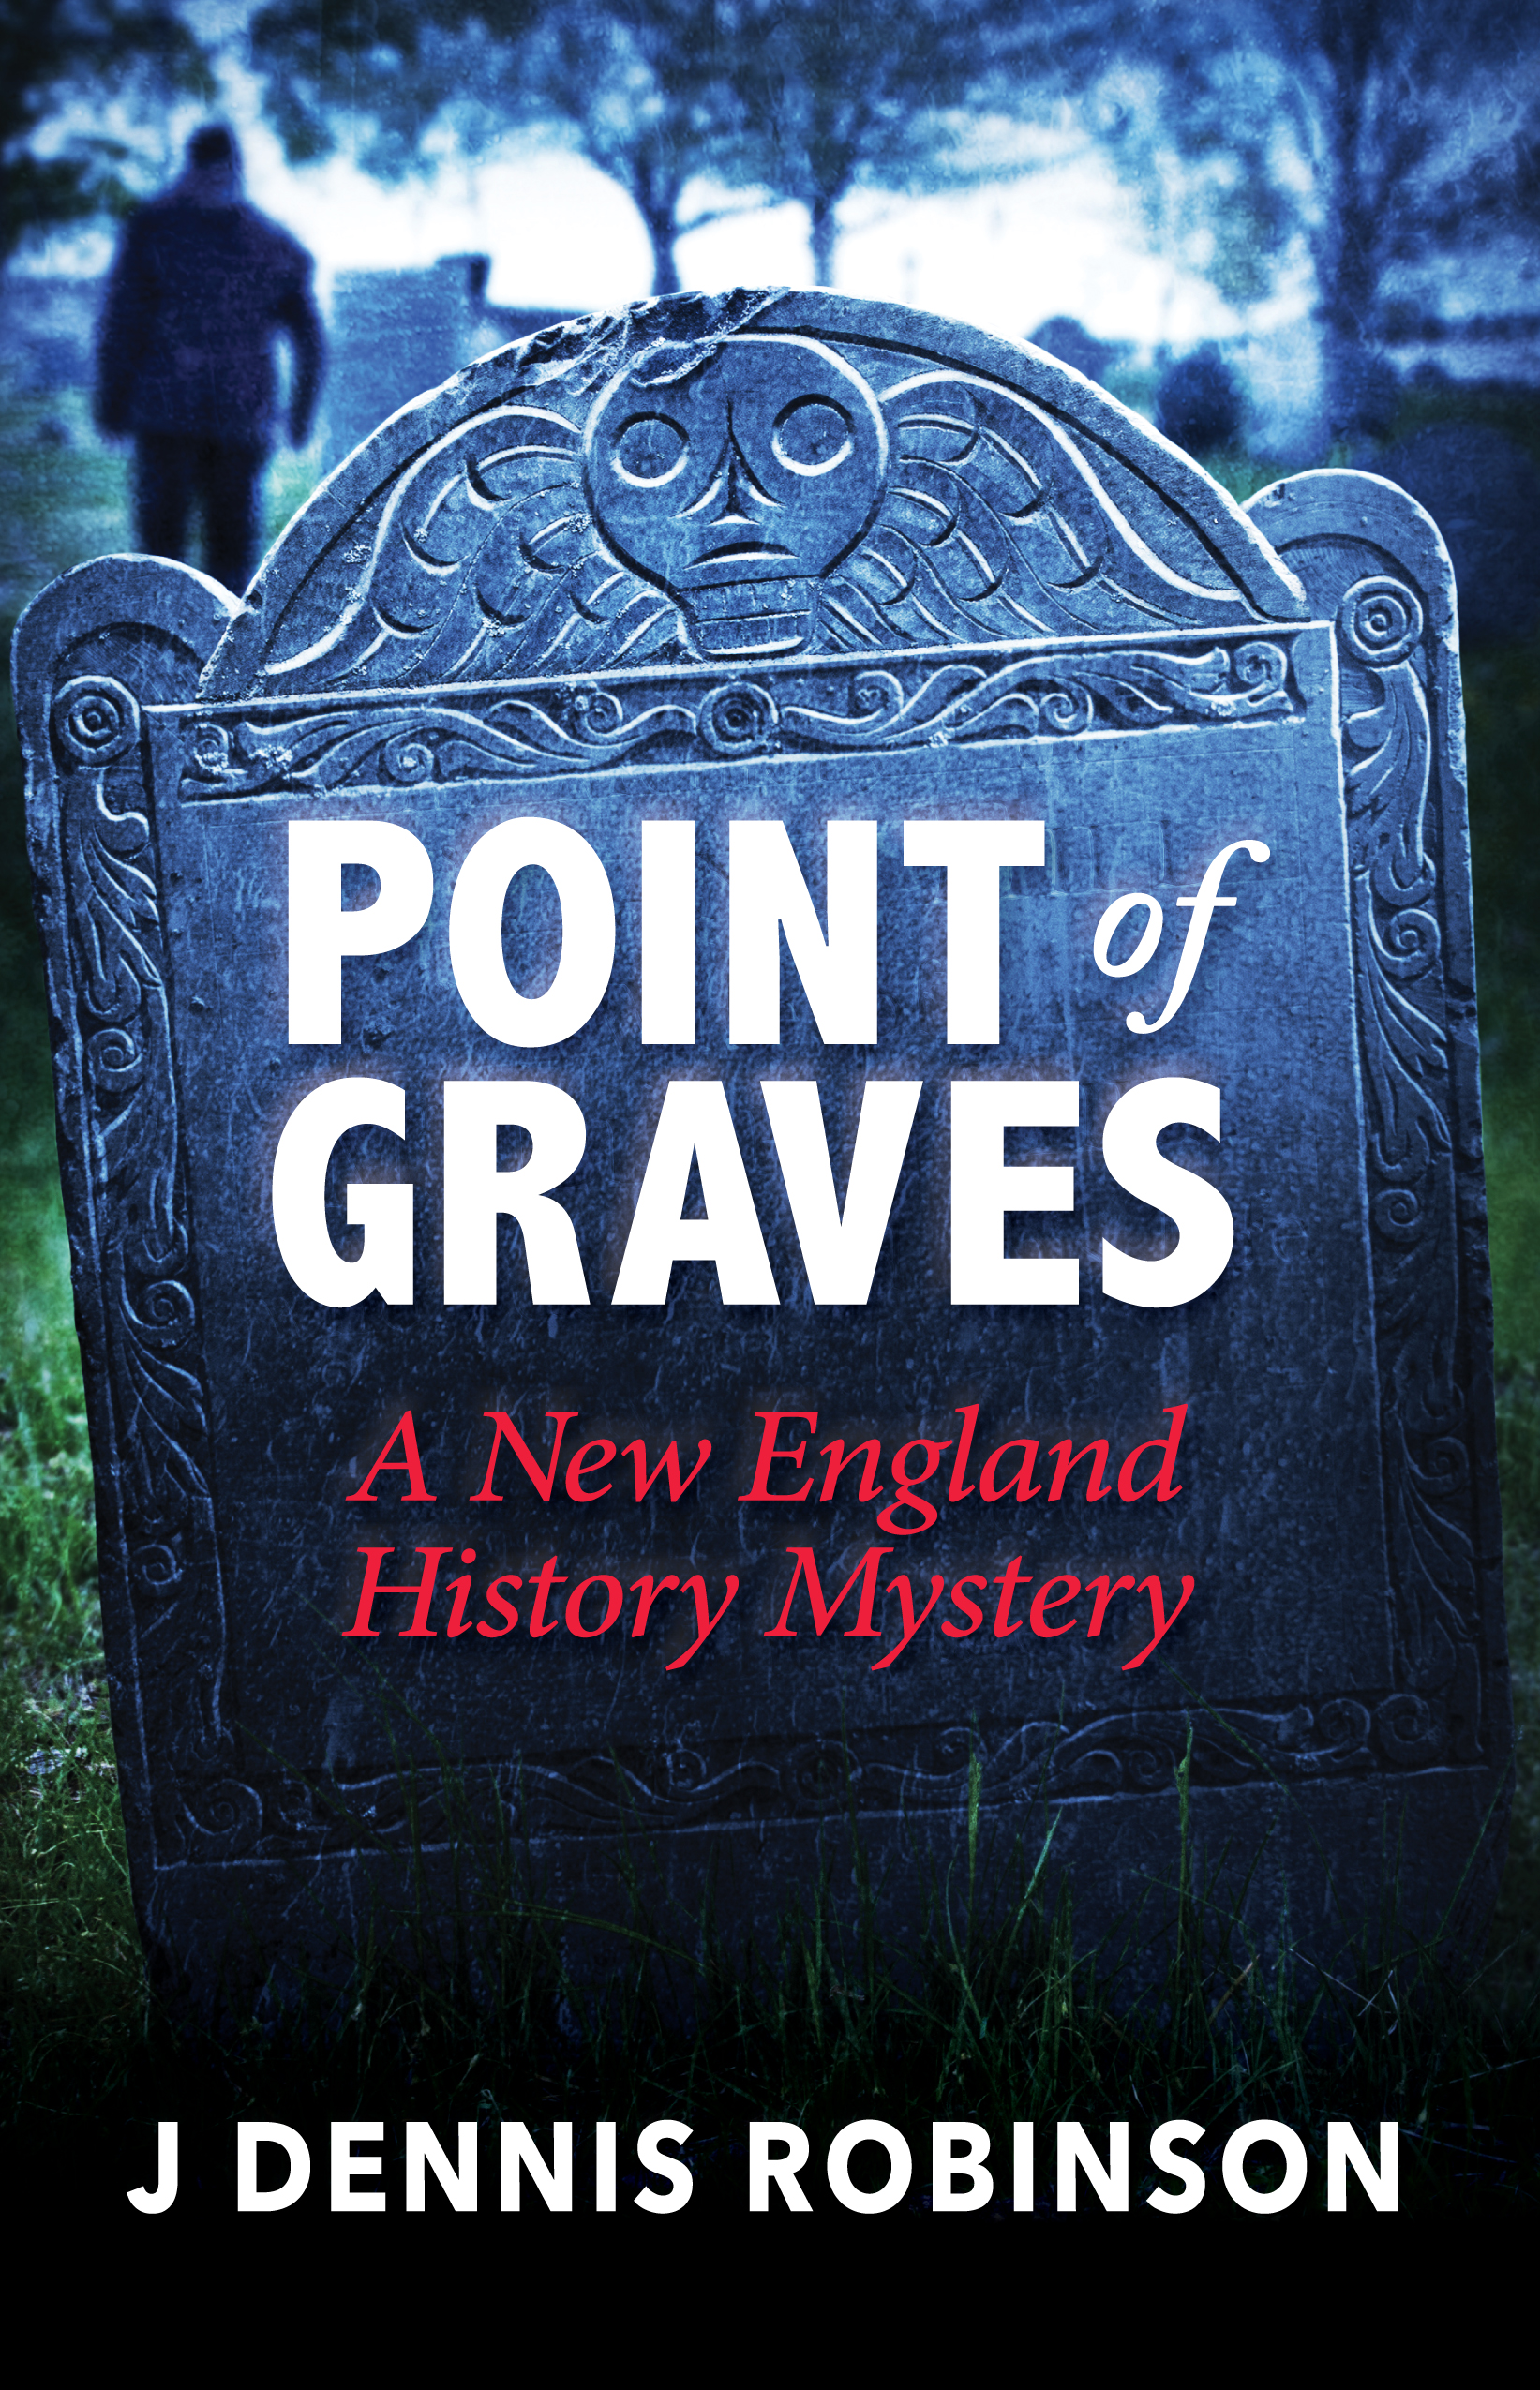 Point of Graves by J Dennis Robinson